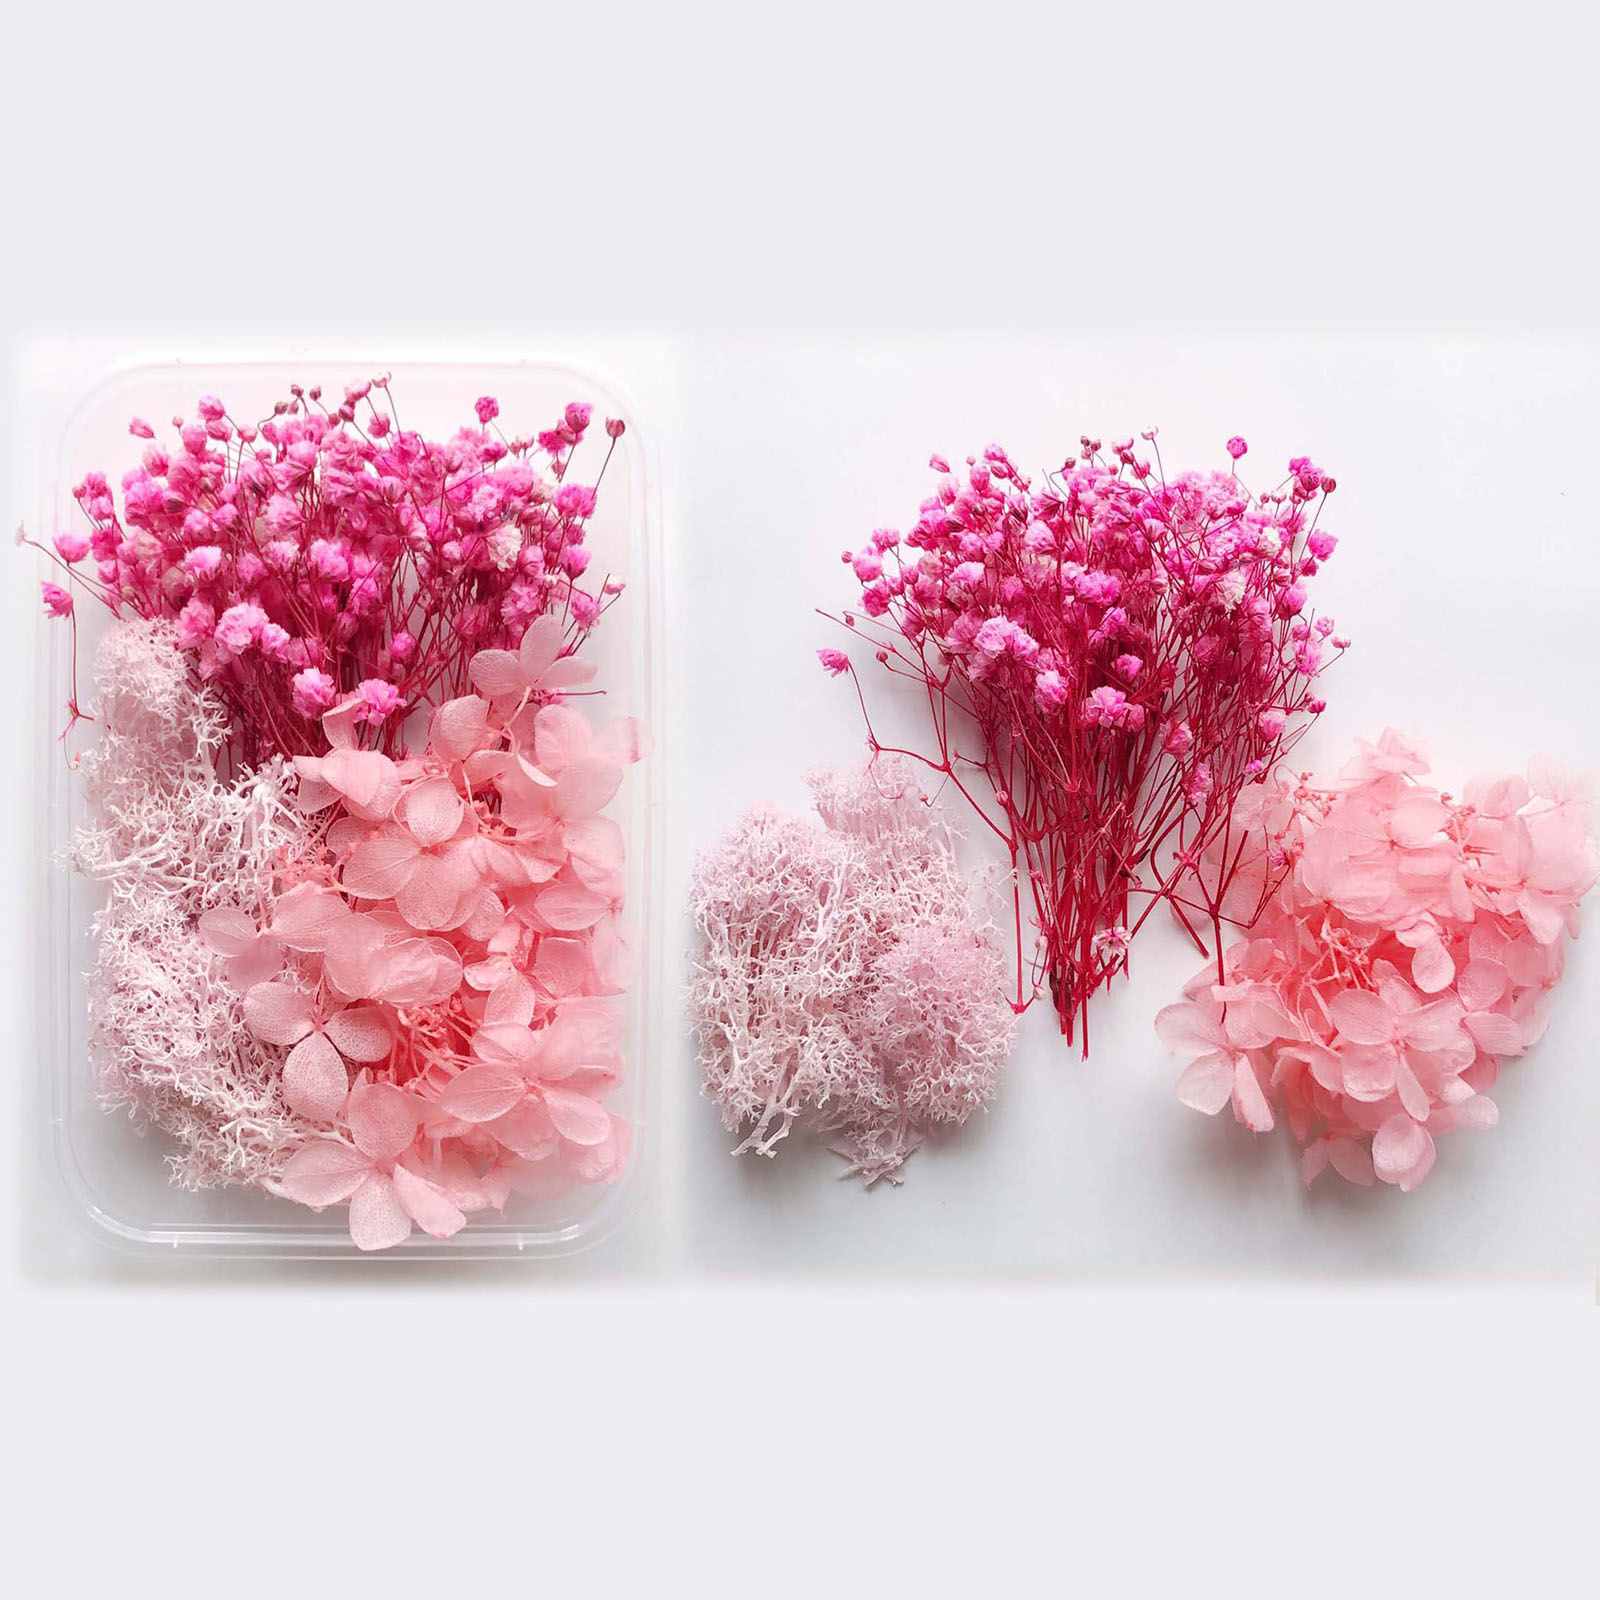 Picture of Real Dried Flower Resin Jewelry Craft Filling Material Pink 17cm x 12cm, 1 Box